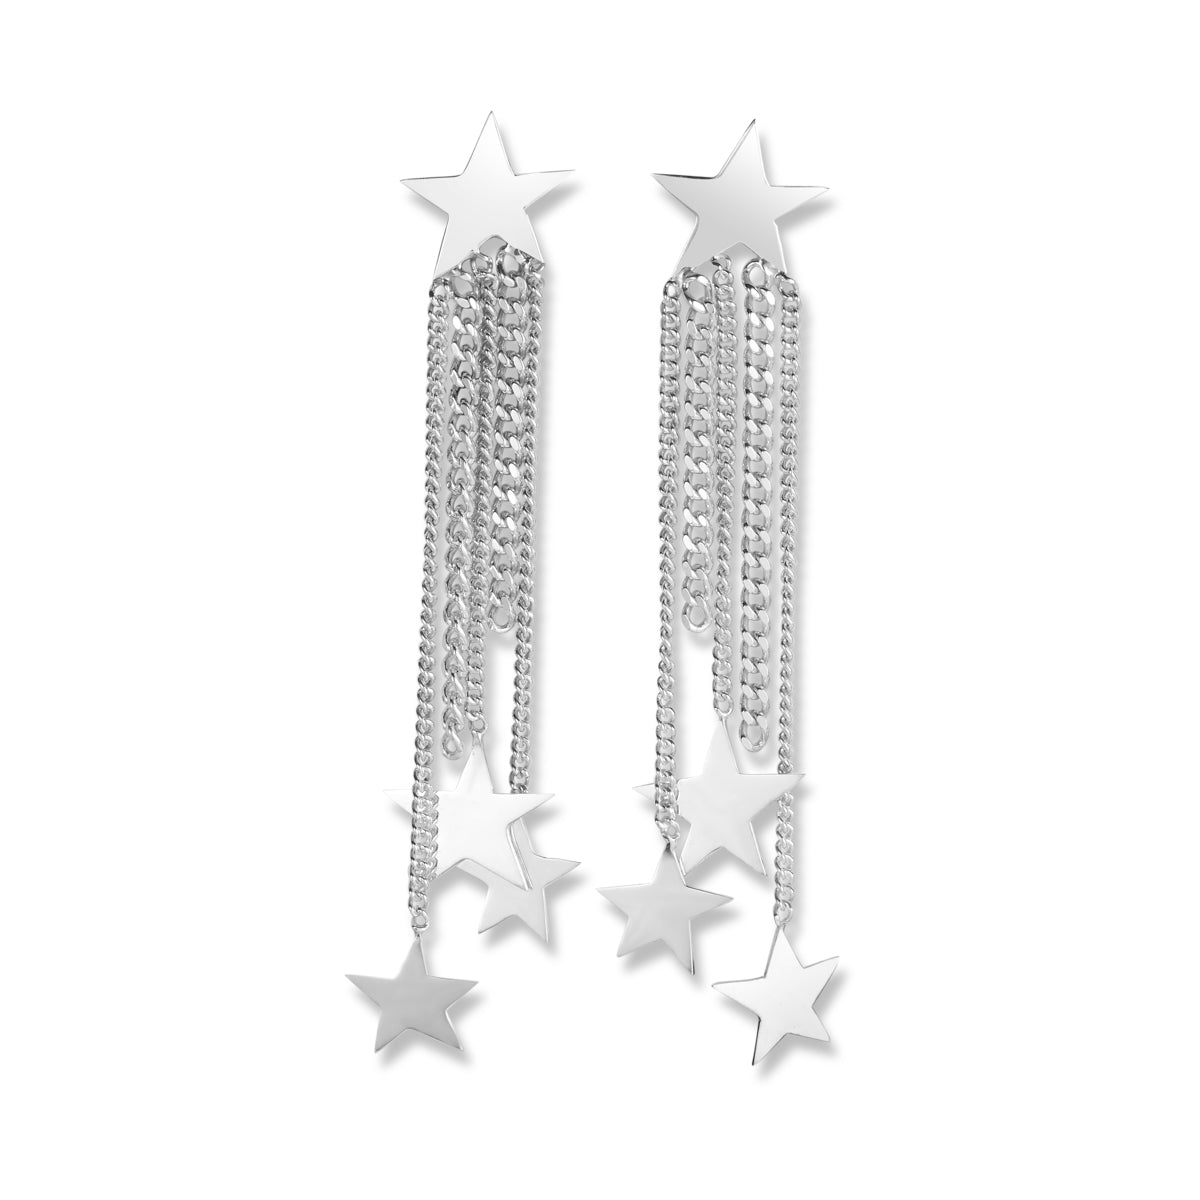 Earrings of sterling silver stars and chains